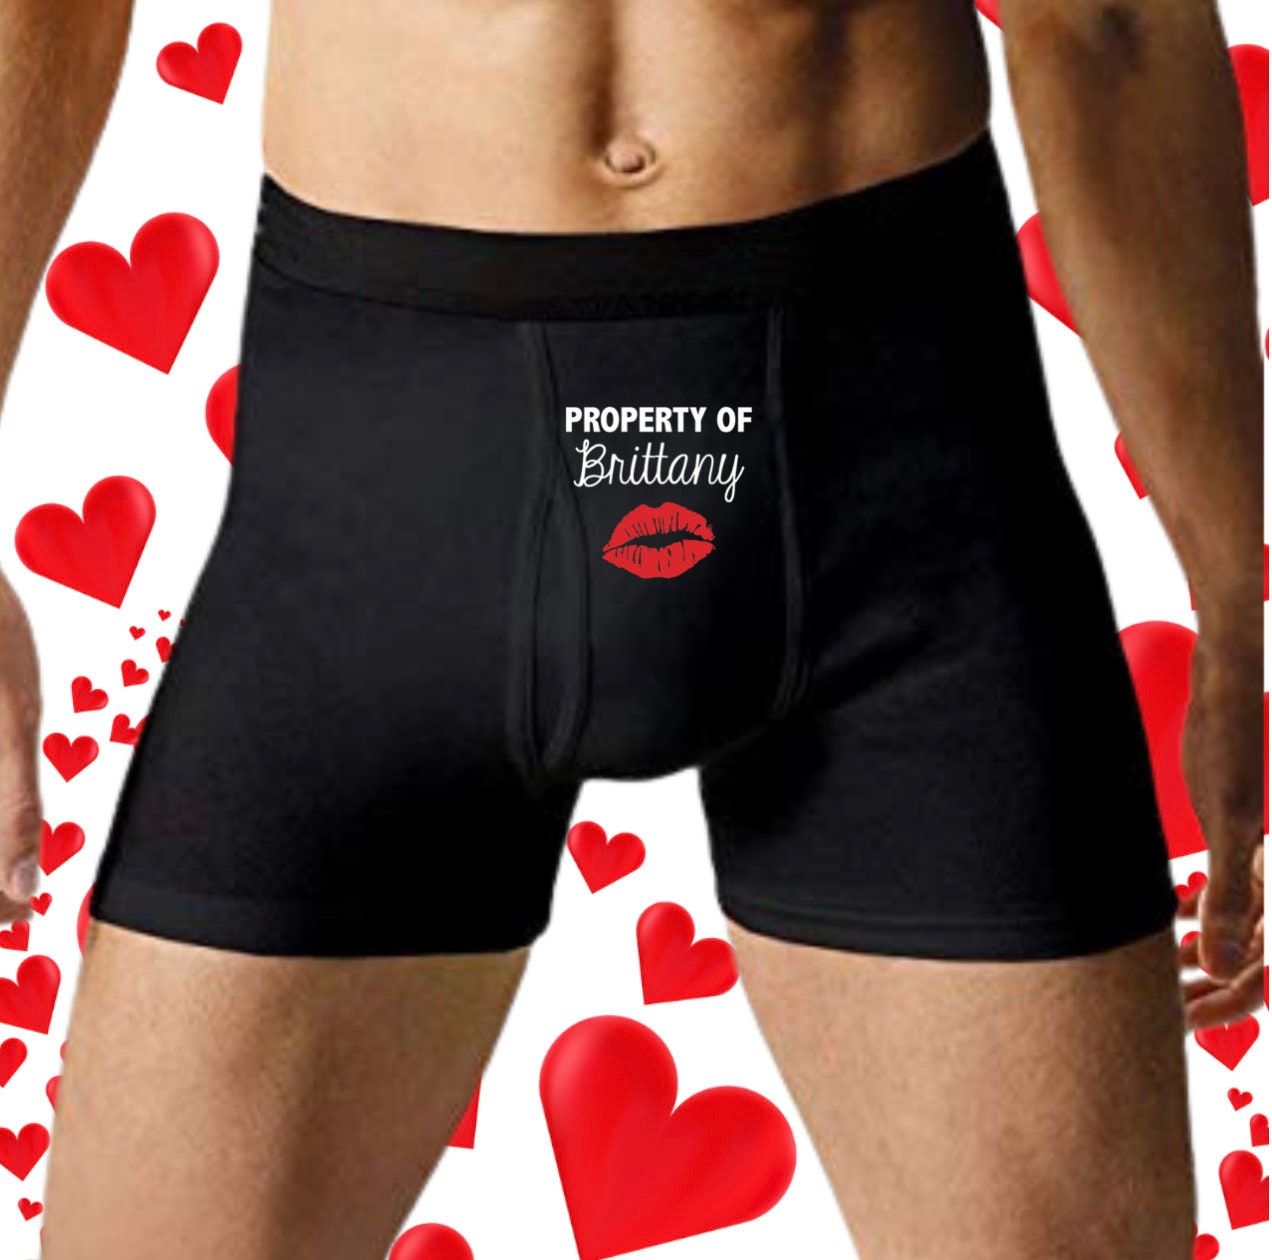 Moonker Valentines Day Gift Sets Men's underwear Men's Sexy Valentine's Day  Underwear Love Heart Printed Sexy Underpants 